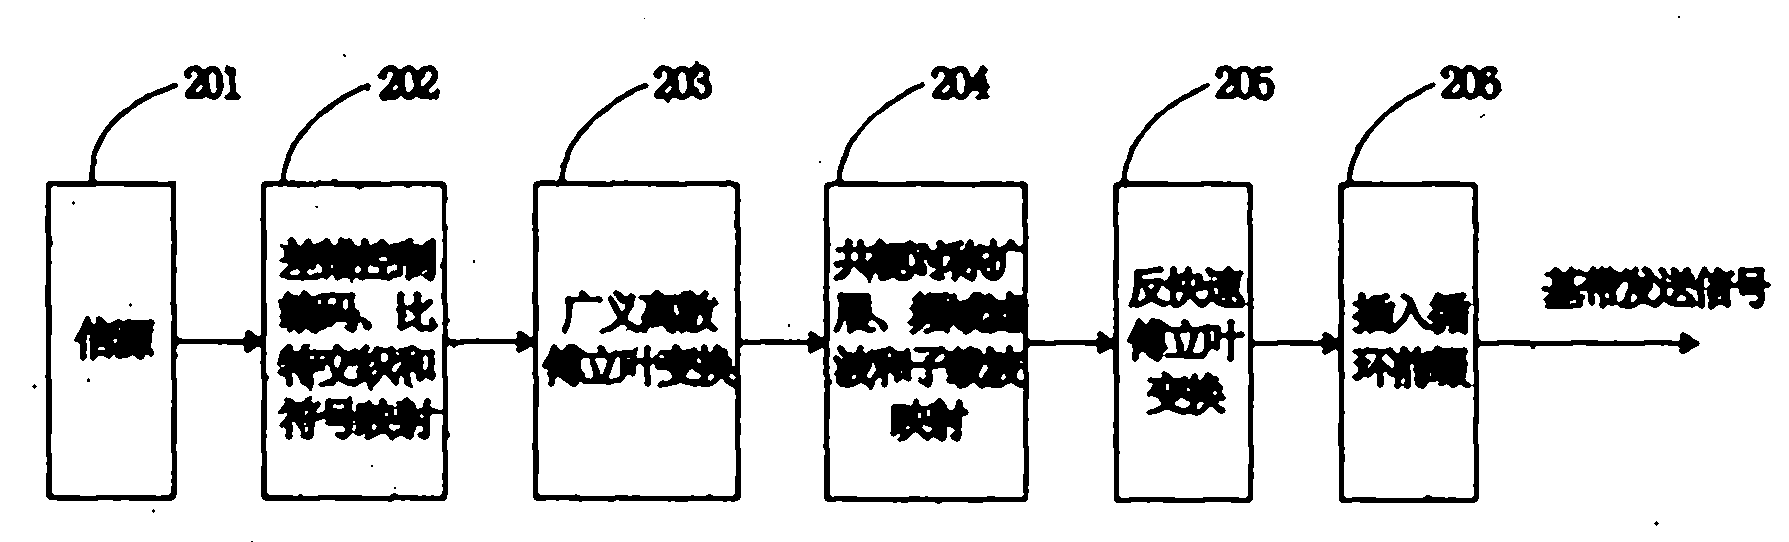 Method for offset-modulation orthogonal frequency division multiplexing transmission with cyclic prefix